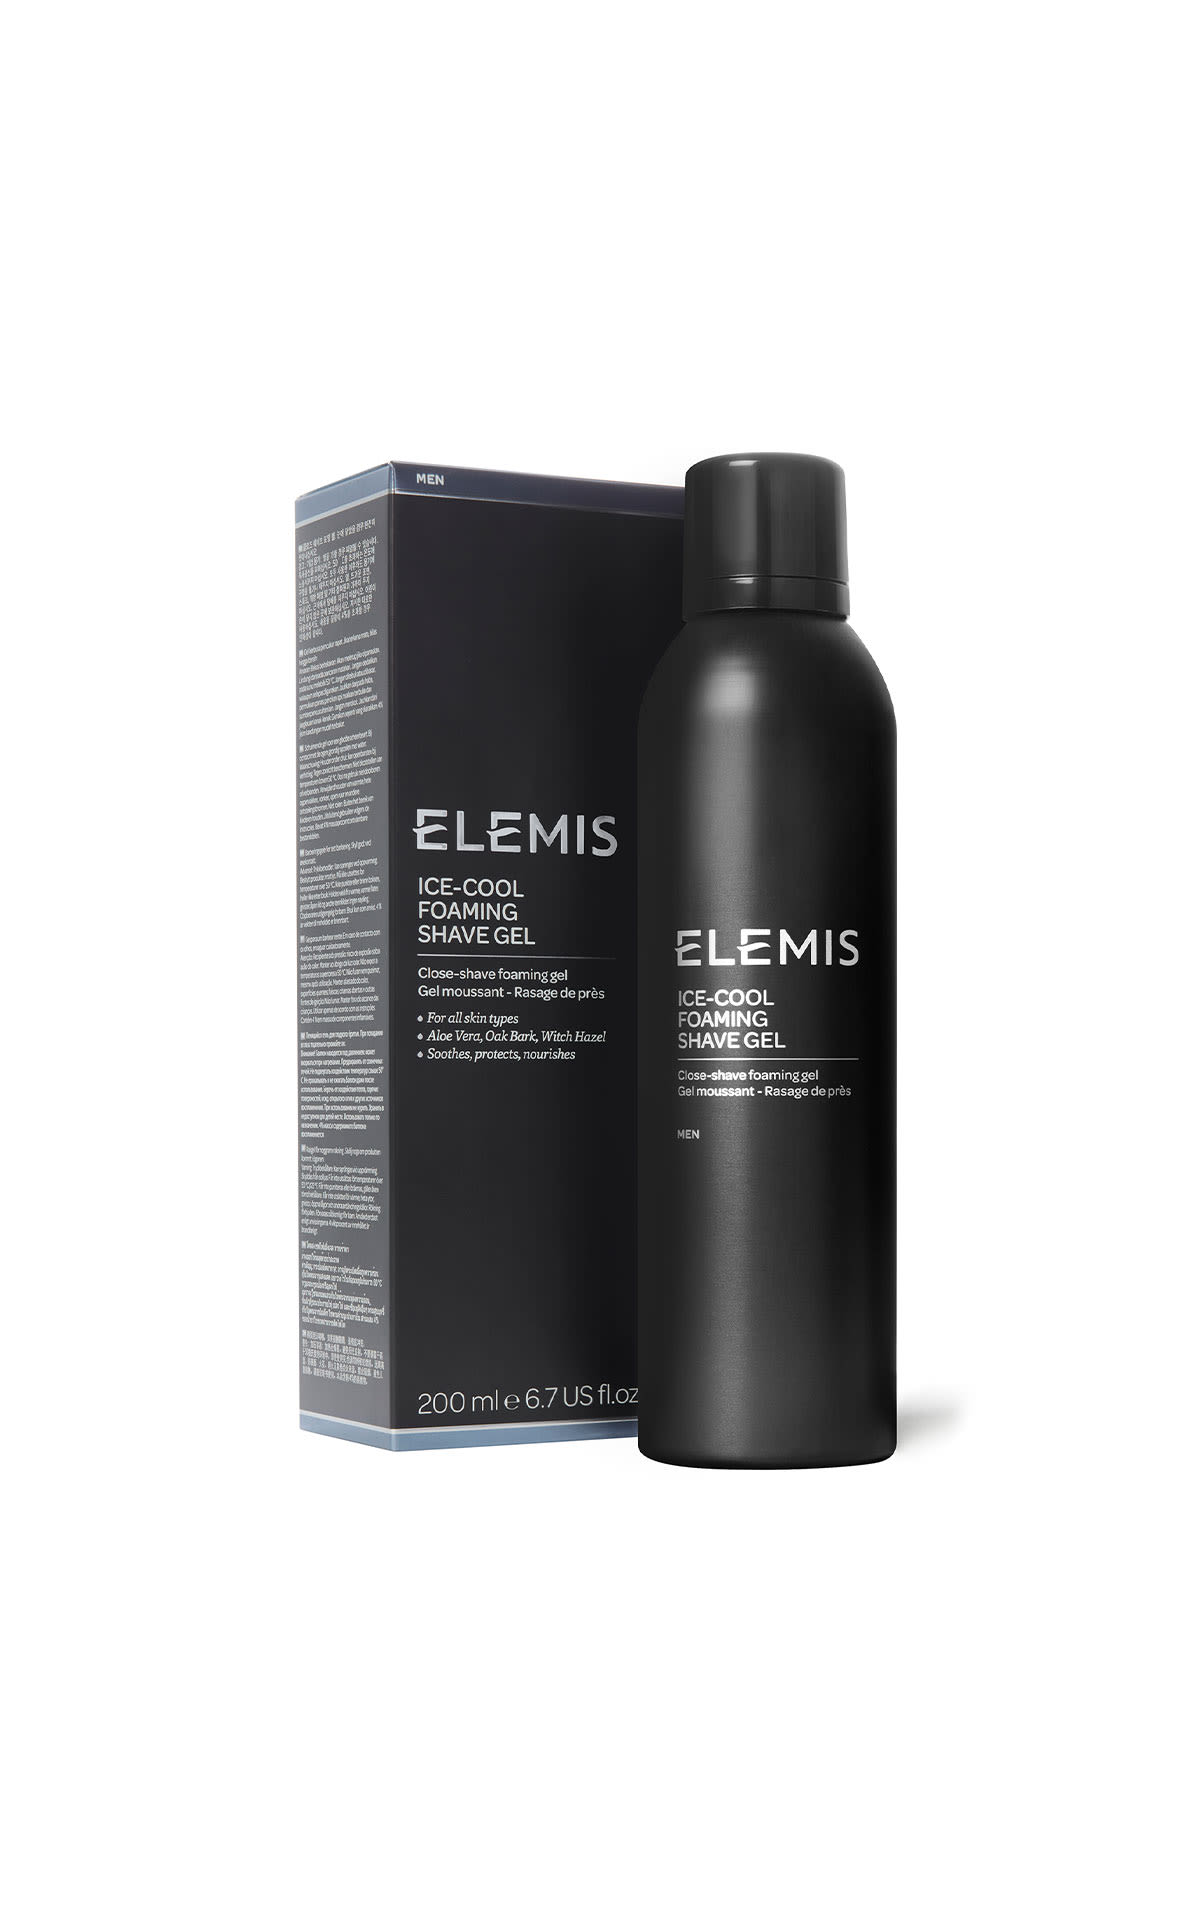 ELEMIS Ice cool foaming shave gel 200ml from Bicester Village